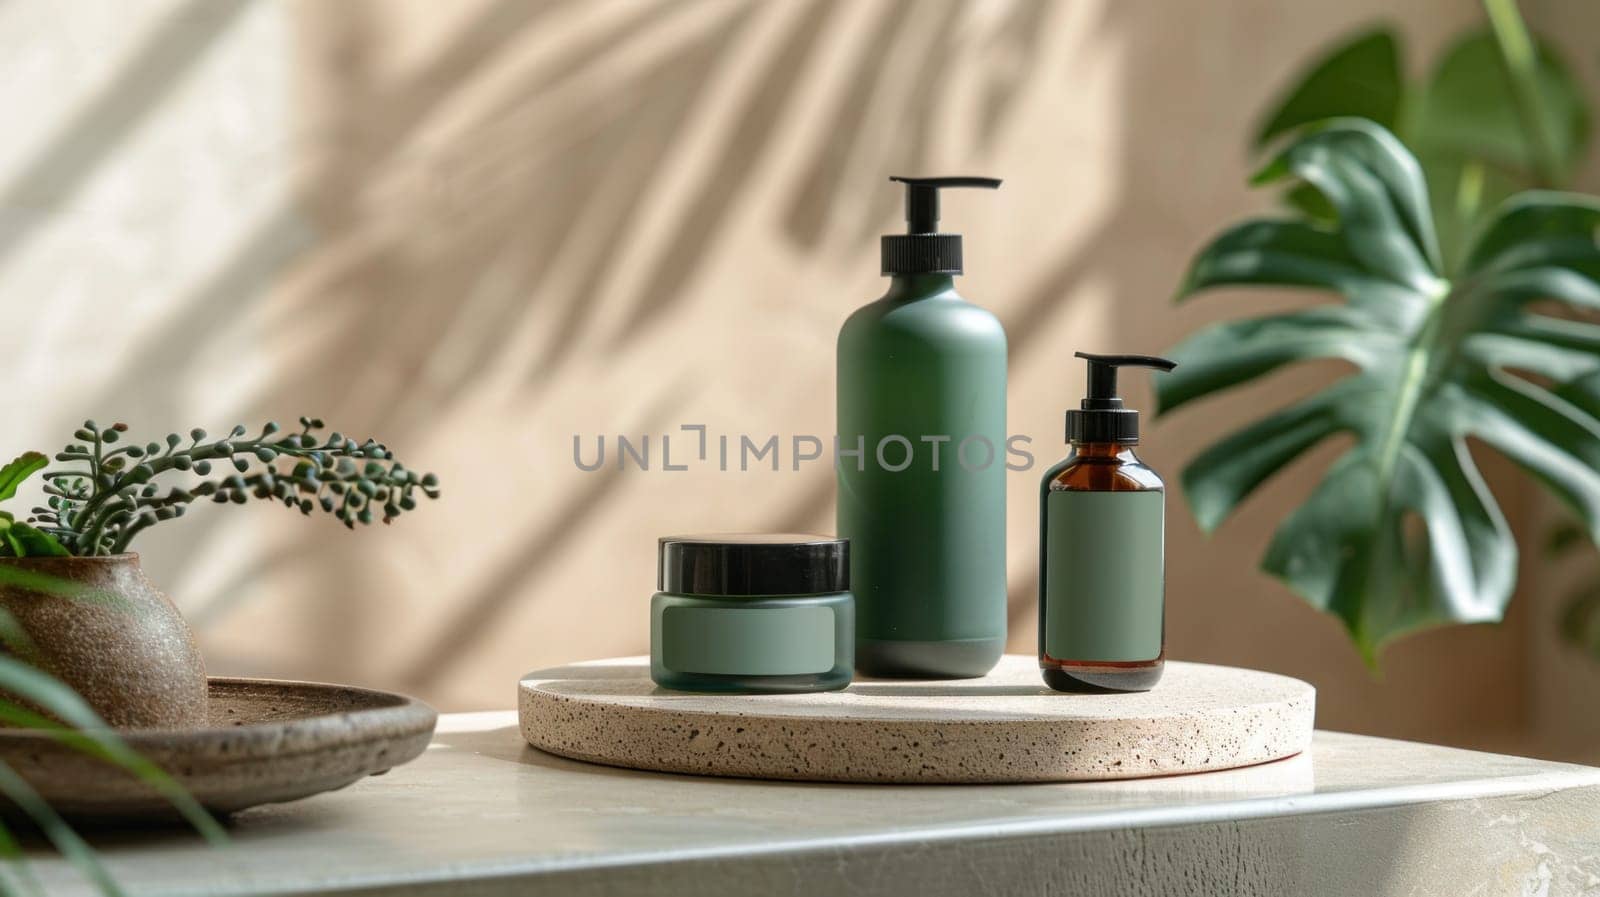 Green Glass Bottle of Body Lotion with Black Pump and Two Bottles of Face Serum on Terrazzo Stand Concept Minimalist Aesthetic Studio Photography.